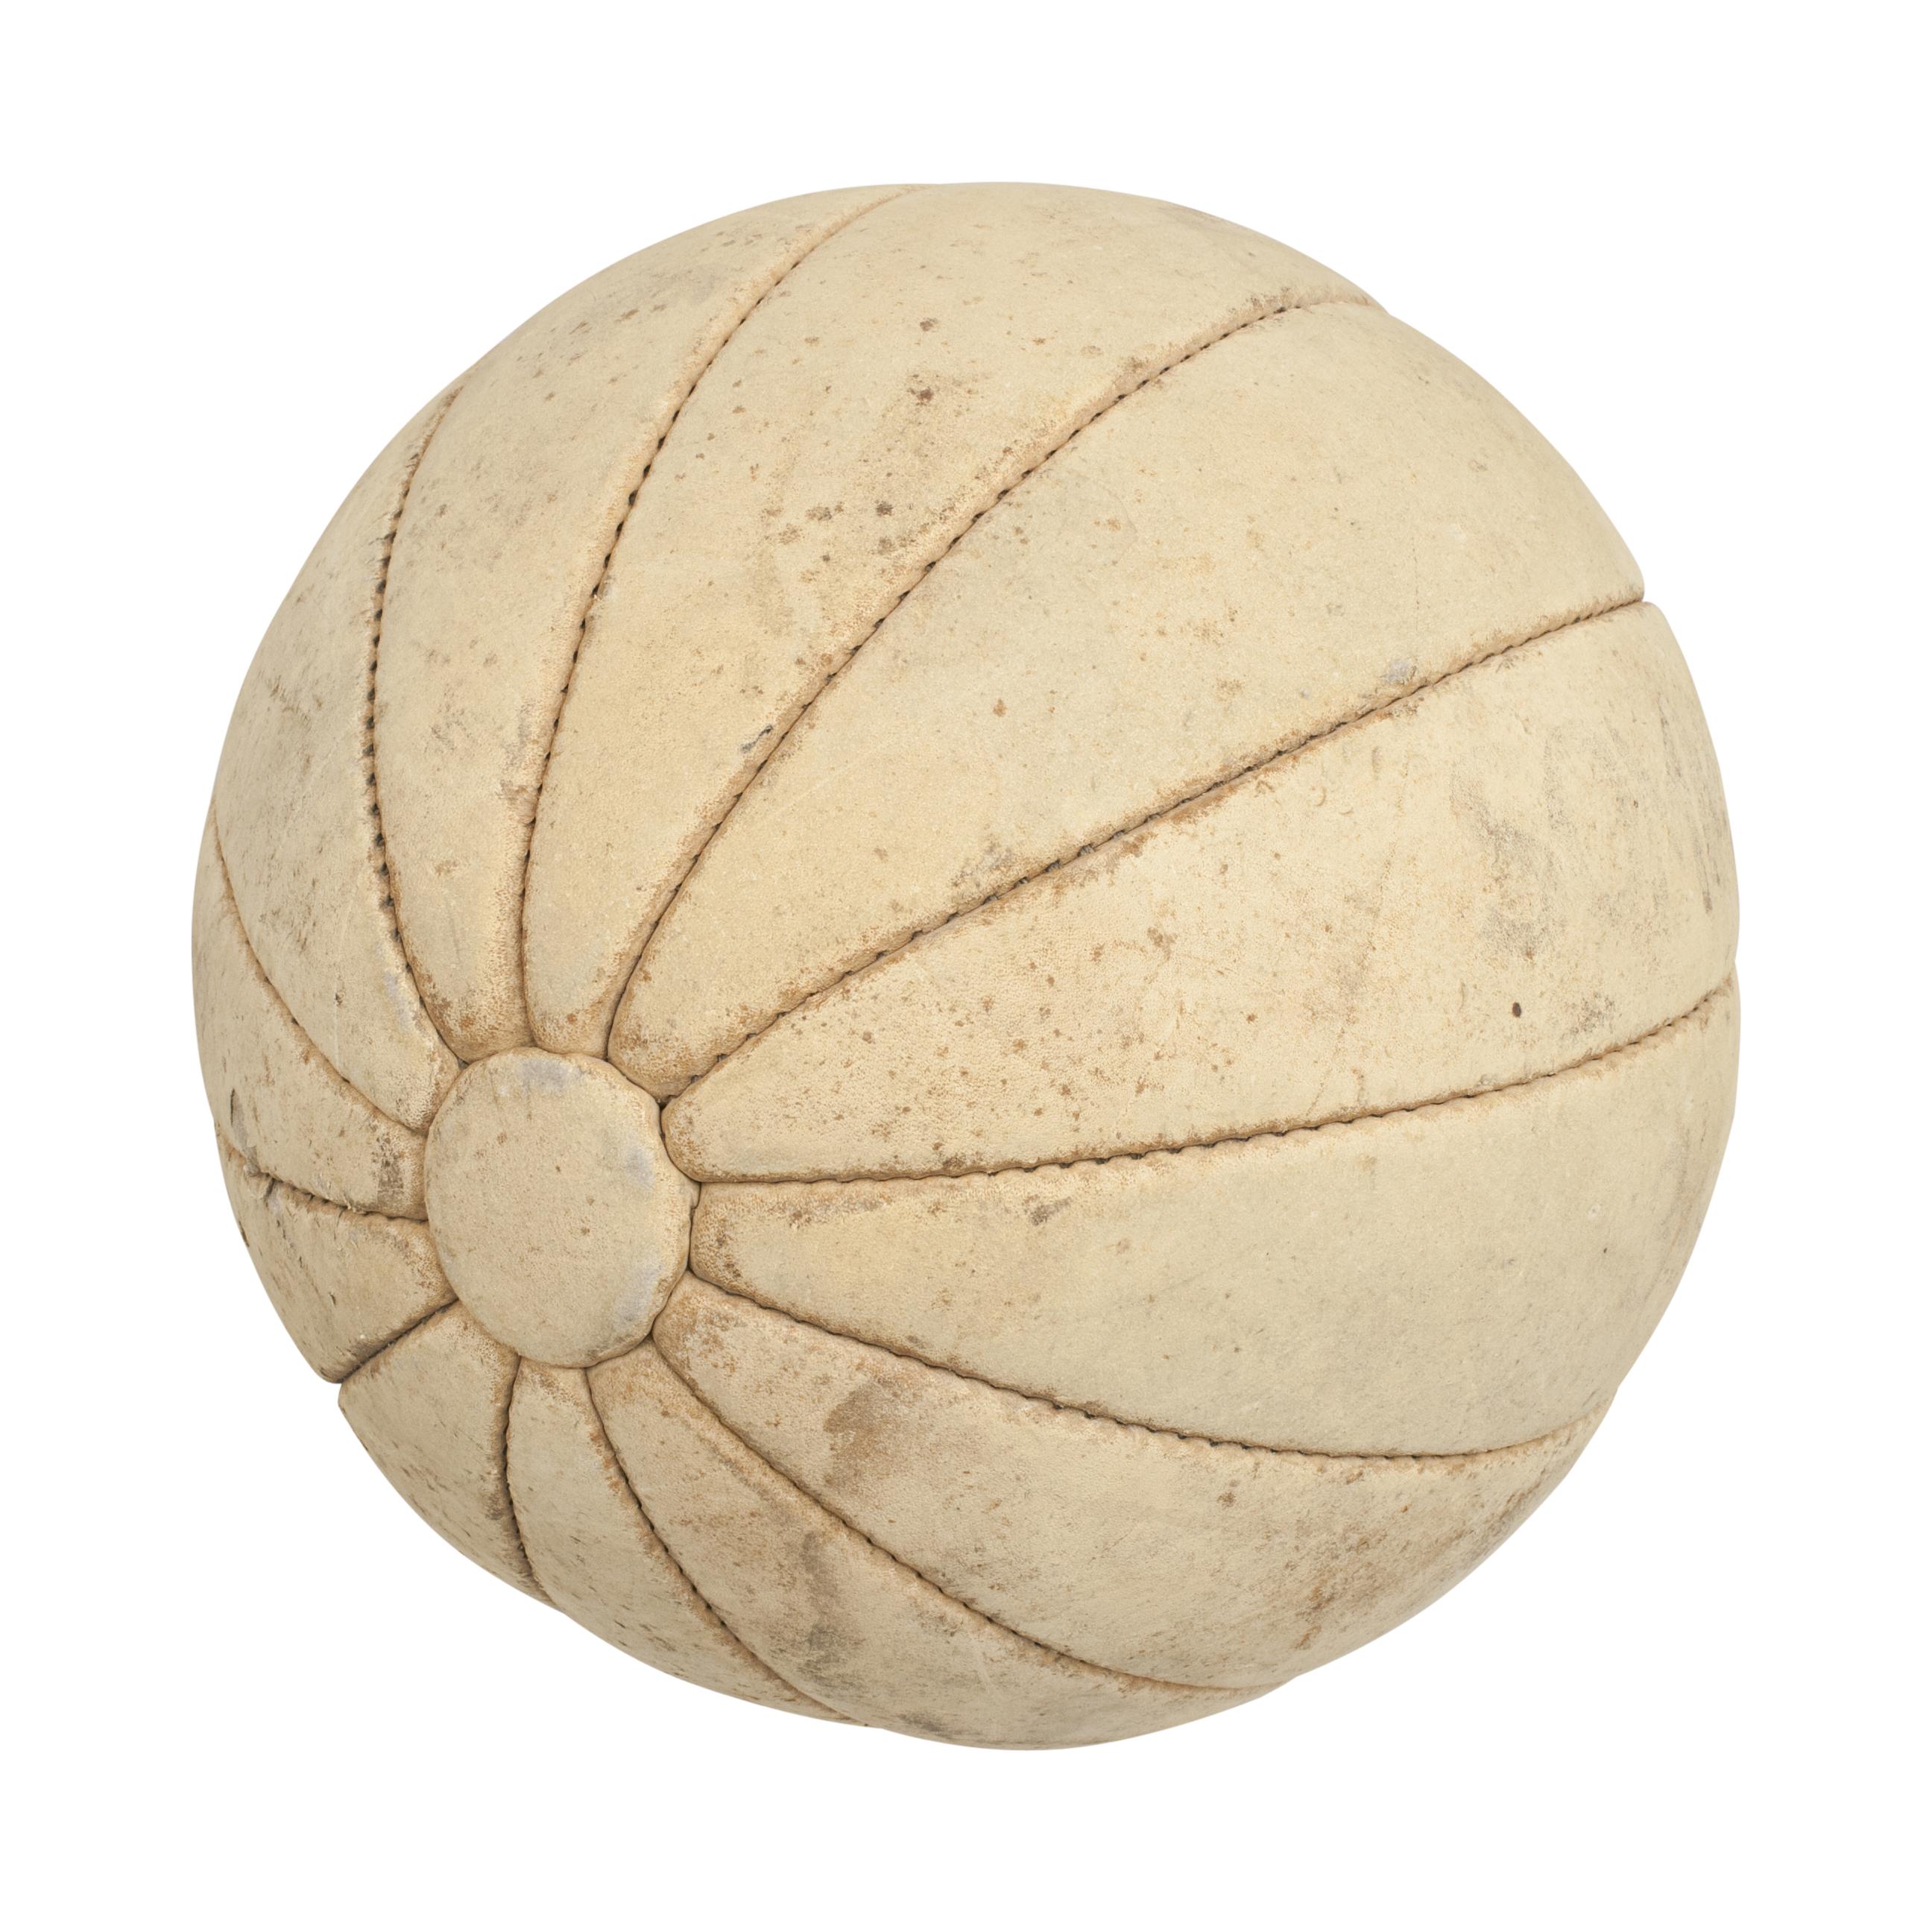 A good quality suede leather medicine ball (pumpkin shaped). The is made from twelve leather segments sewn around two leather discs (one at each end). One of the segments has a faint name on it 'SOMMS'. These types of balls have been widely used for